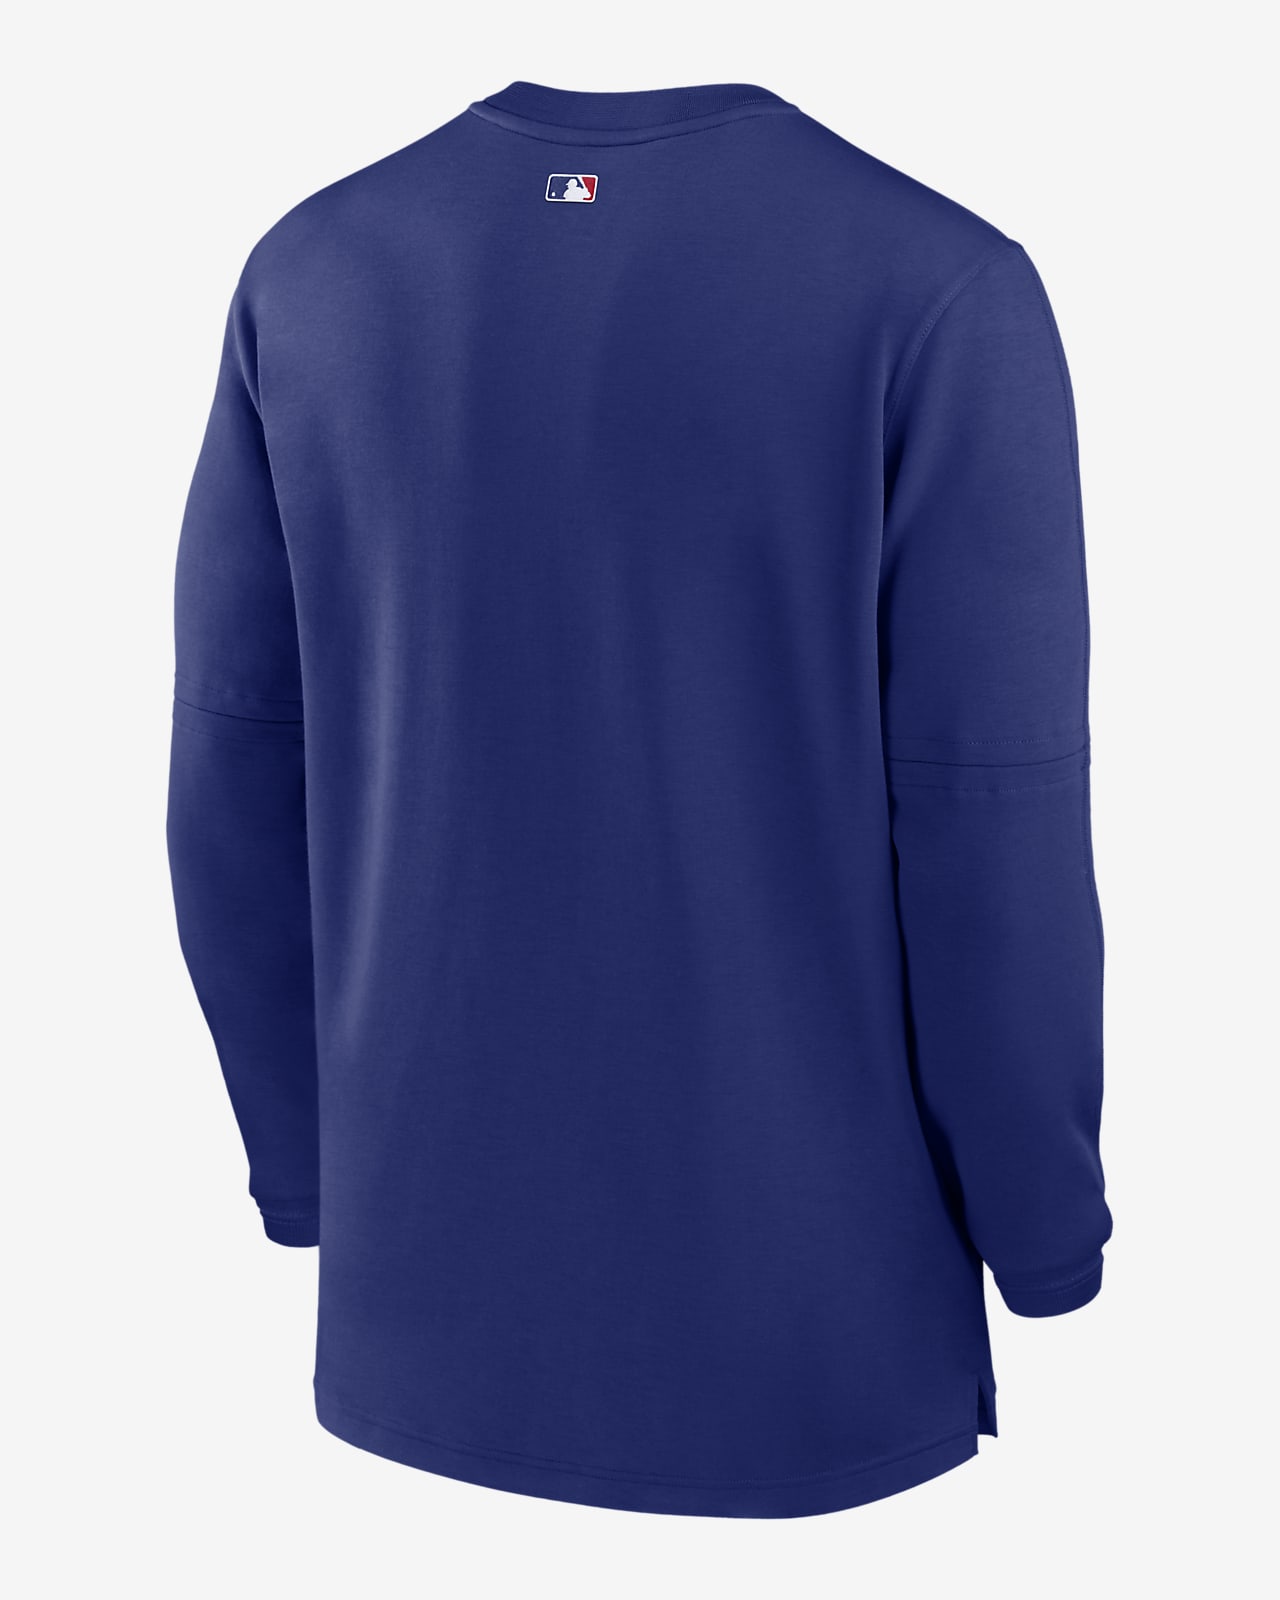 Texas Rangers Authentic Collection Game Time Men's Nike Dri-FIT MLB 1/2-Zip  Long-Sleeve Top.